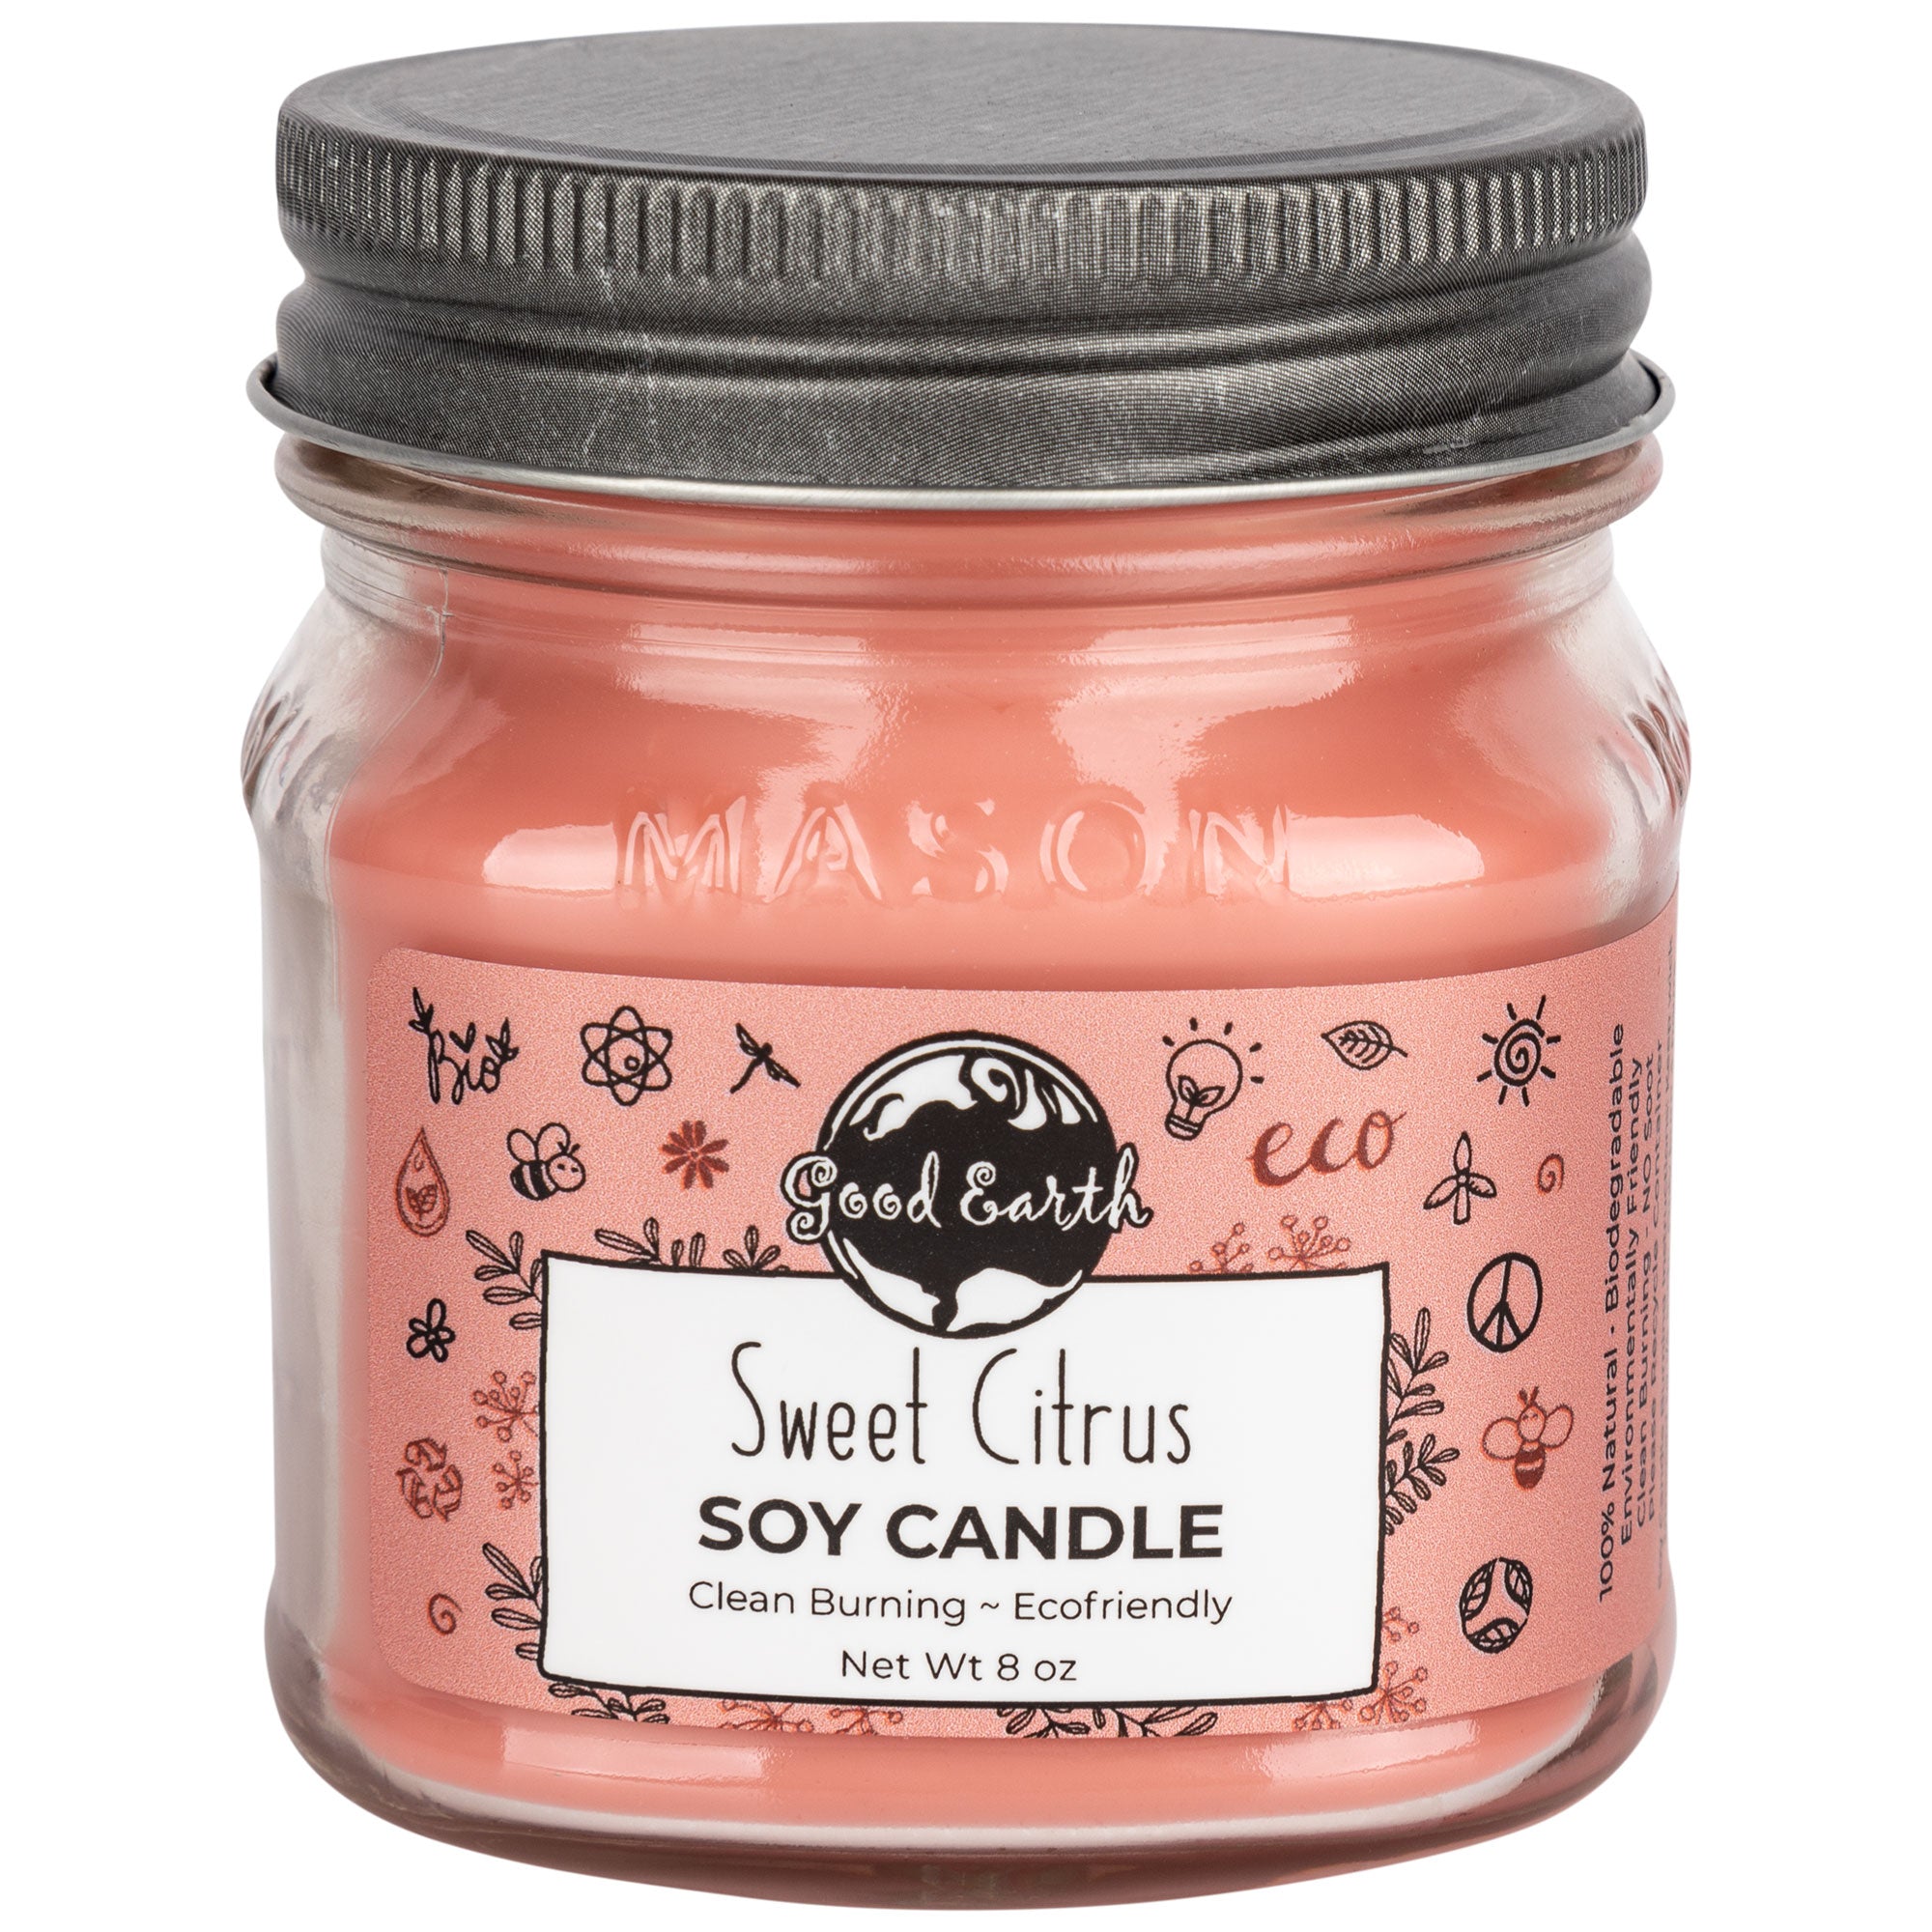 Good Earth Soy Candle - Sweet Citrus